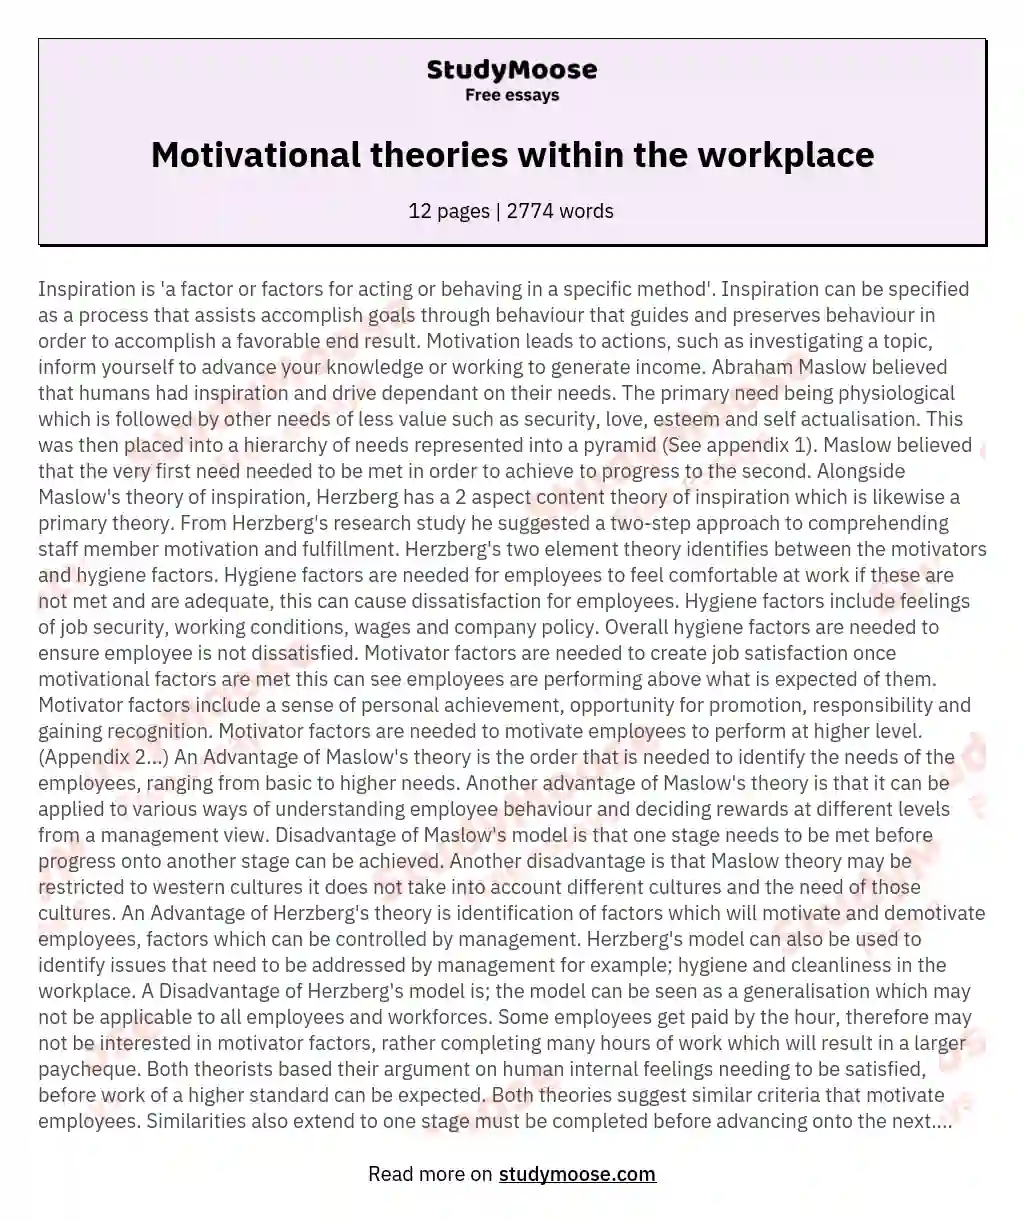 Motivational theories within the workplace essay